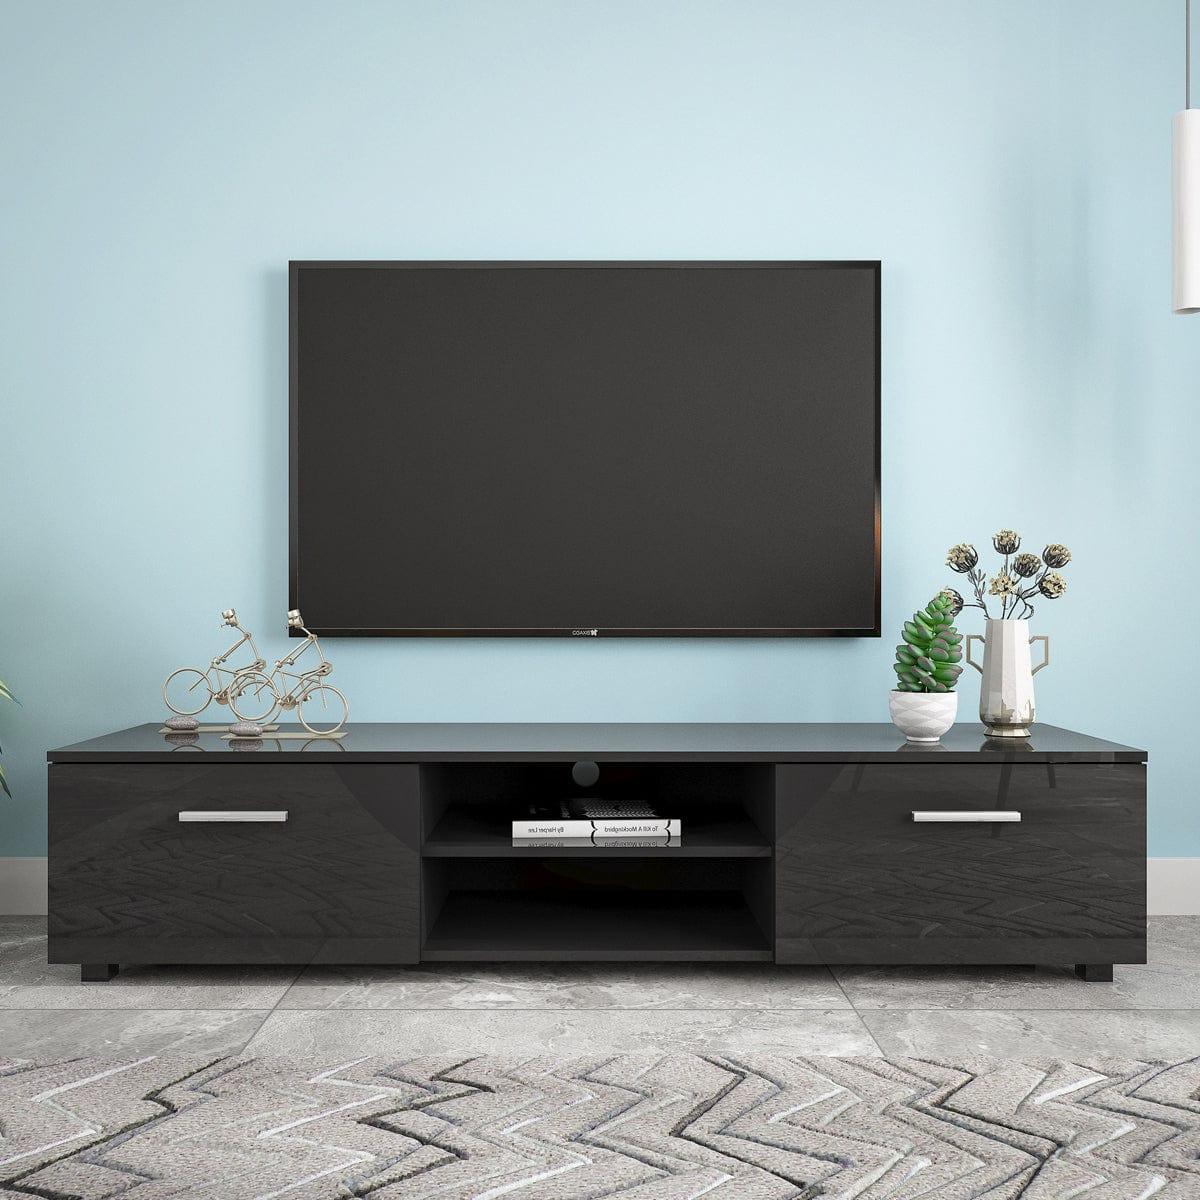 Shop Black TV Stand for 70 Inch TV Stands, Media Console Entertainment Center Television Table, 2 Storage Cabinet with Open Shelves for Living Room Bedroom Mademoiselle Home Decor